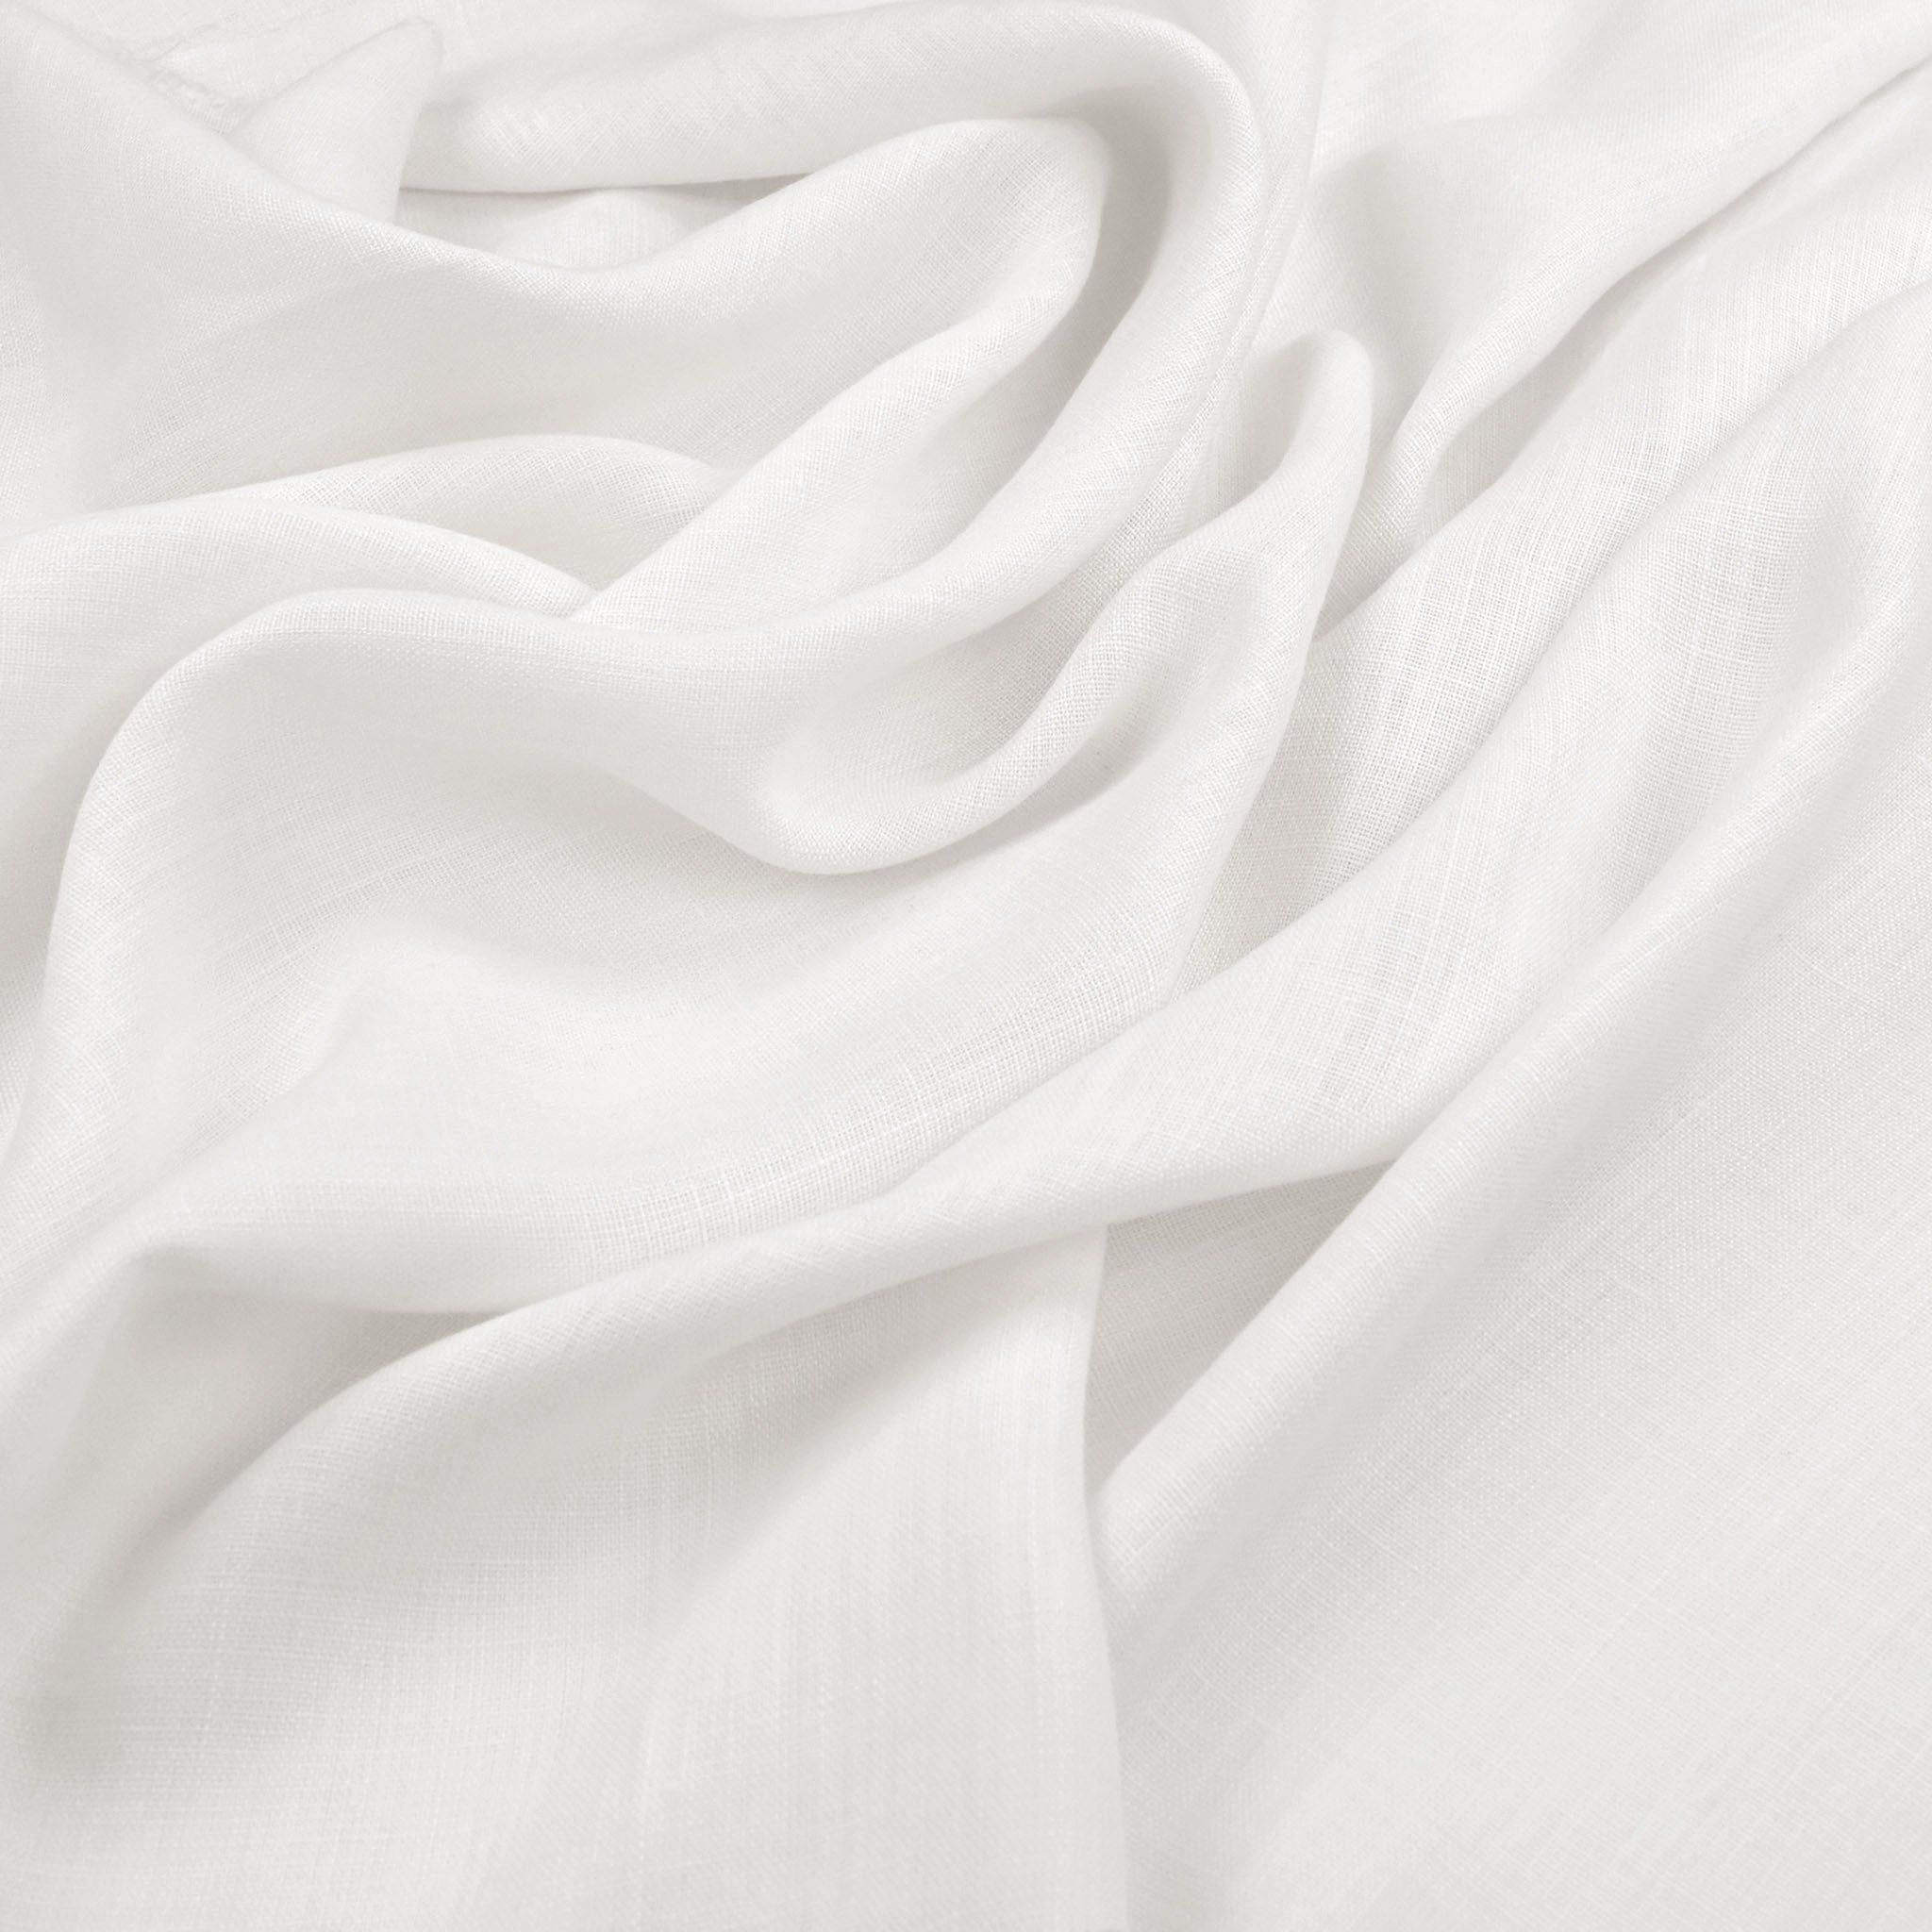 Linen or silk — which is better for the summer?